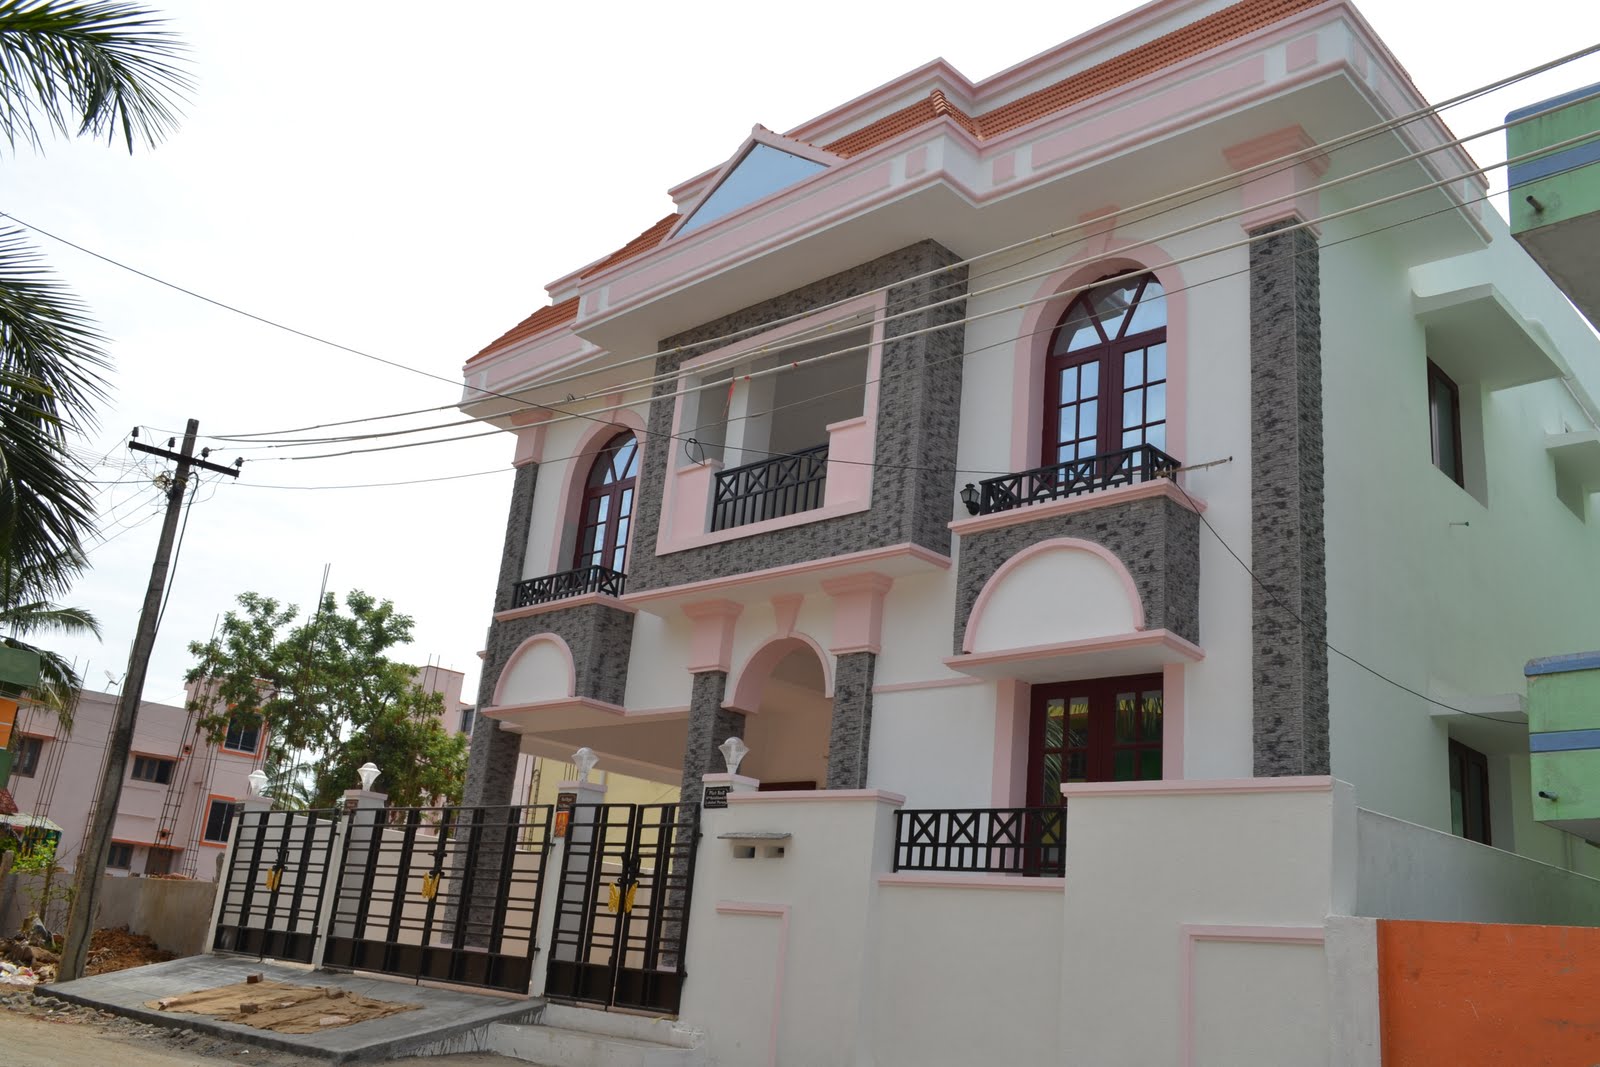 Perspective view of Recently Constructed House at Chromepet for Dr.Bhagavathy Yeramilli..